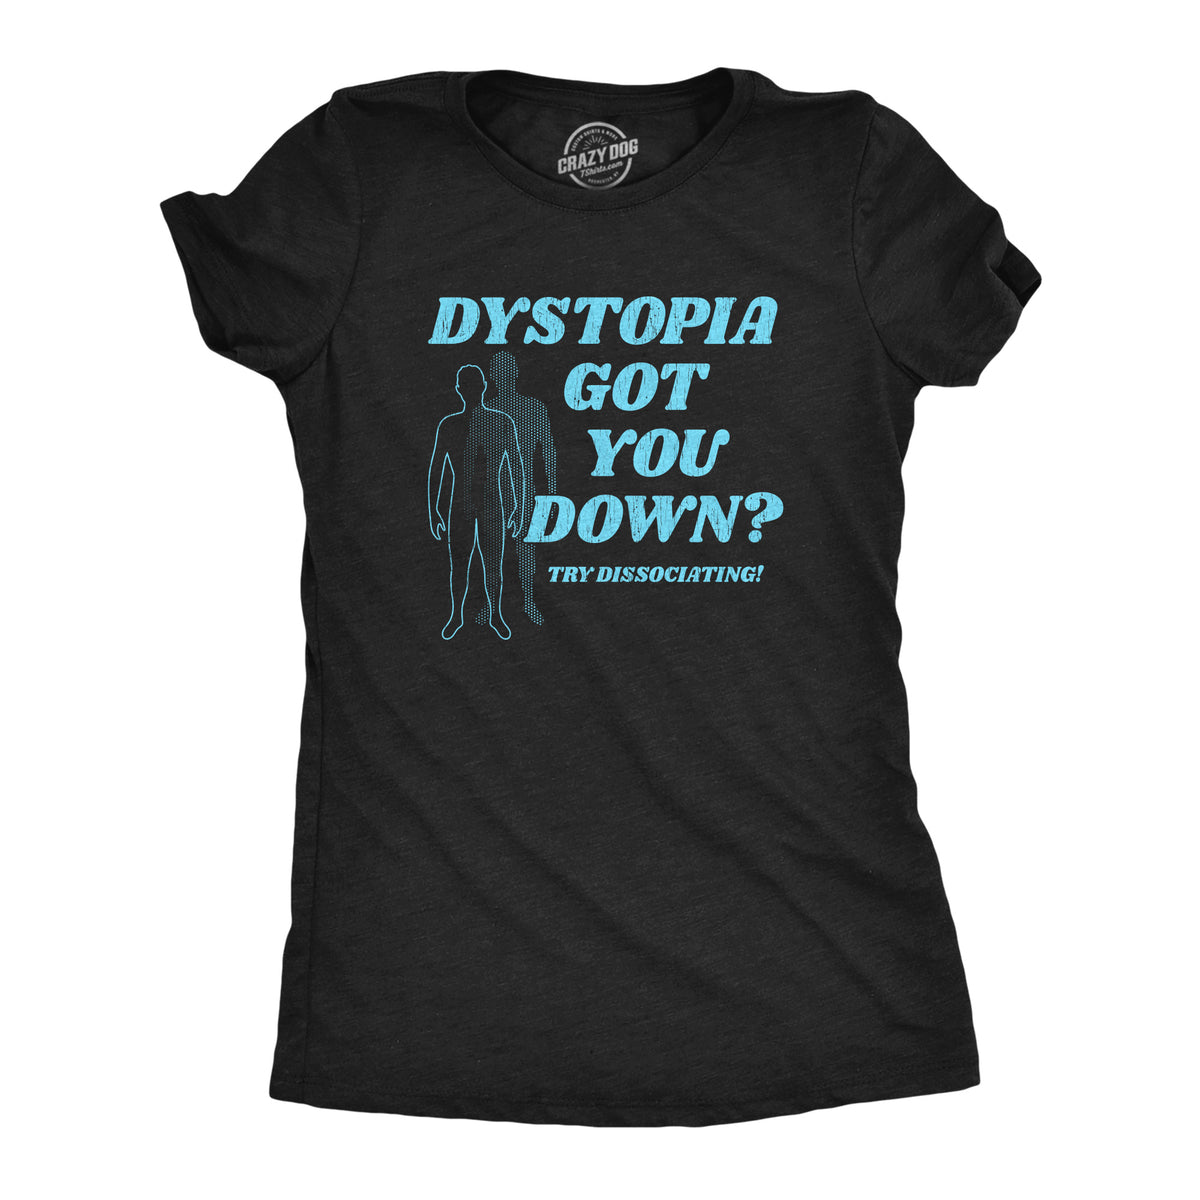 Funny Heather Black - DYSTOPIA Dystopia Got You Down Try Dissociating Womens T Shirt Nerdy sarcastic Tee